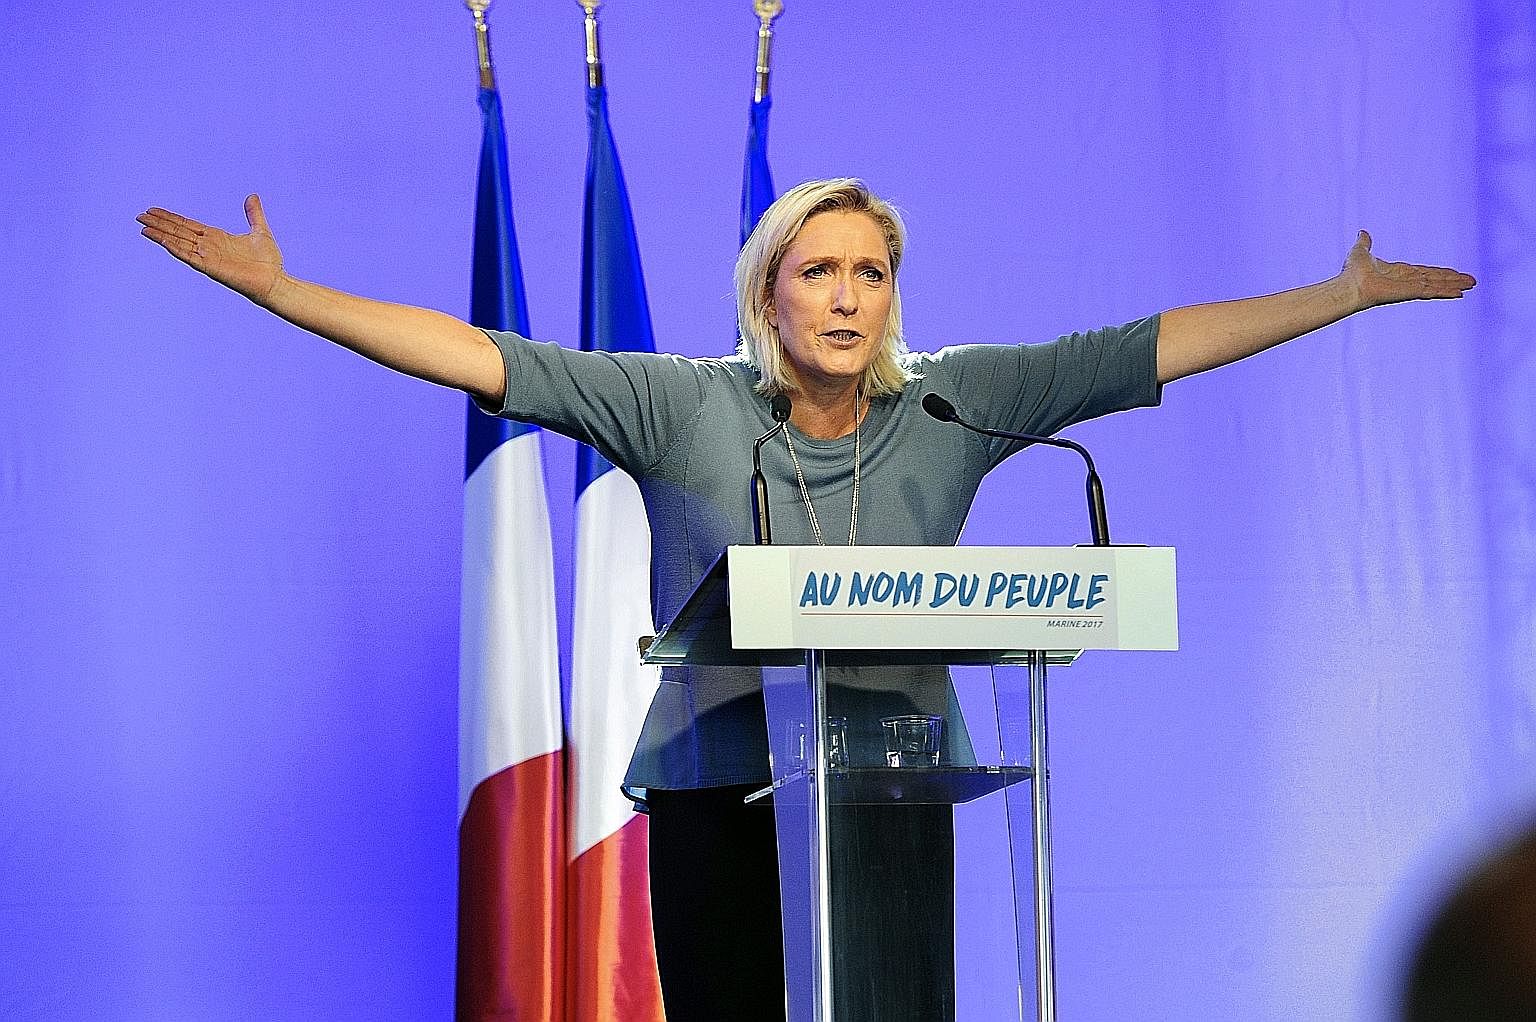 In contrast, Ms Le Pen is a twice-divorced mother of three. As a child, she survived a bomb attack and later, her mother's abandonment. She went on to transform the National Front, a party her father founded, from a fringe movement, which acted as a 